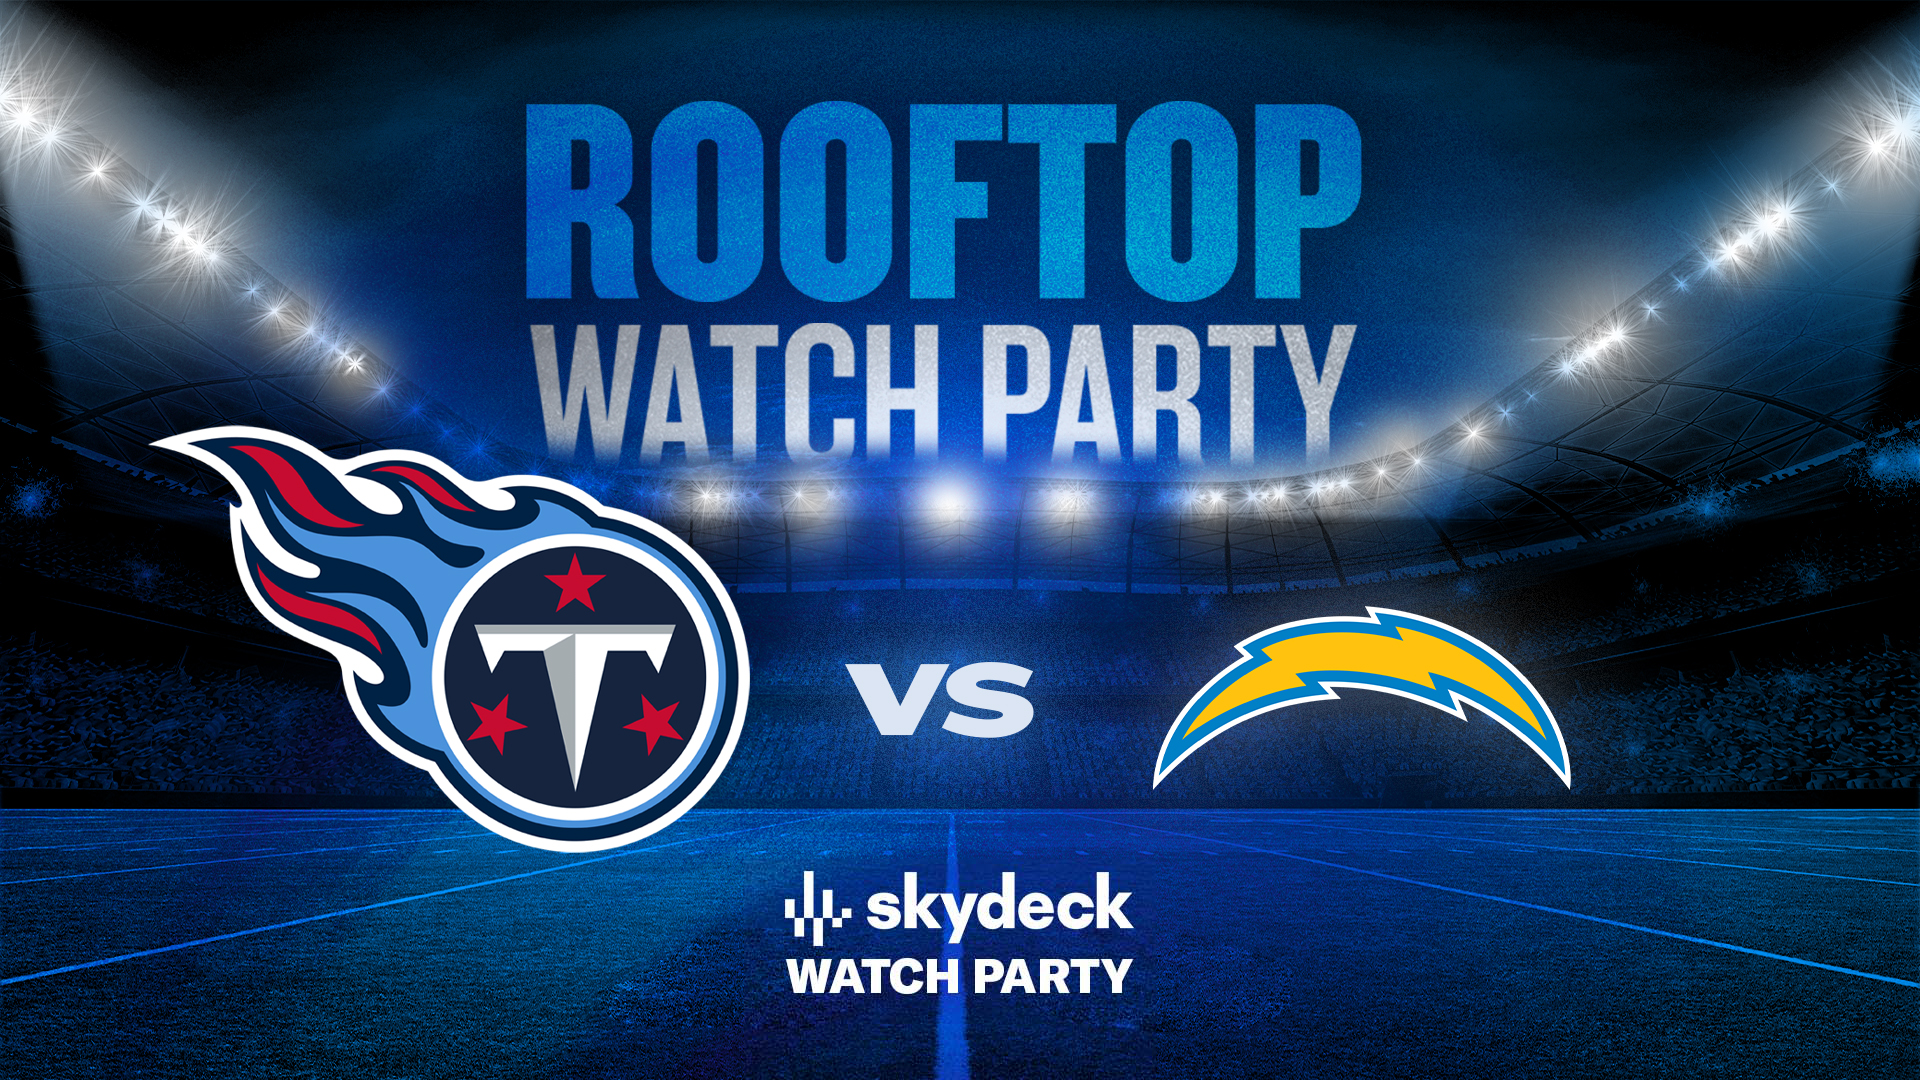 Promo image of Titans vs. Chargers | Skydeck Watch Party